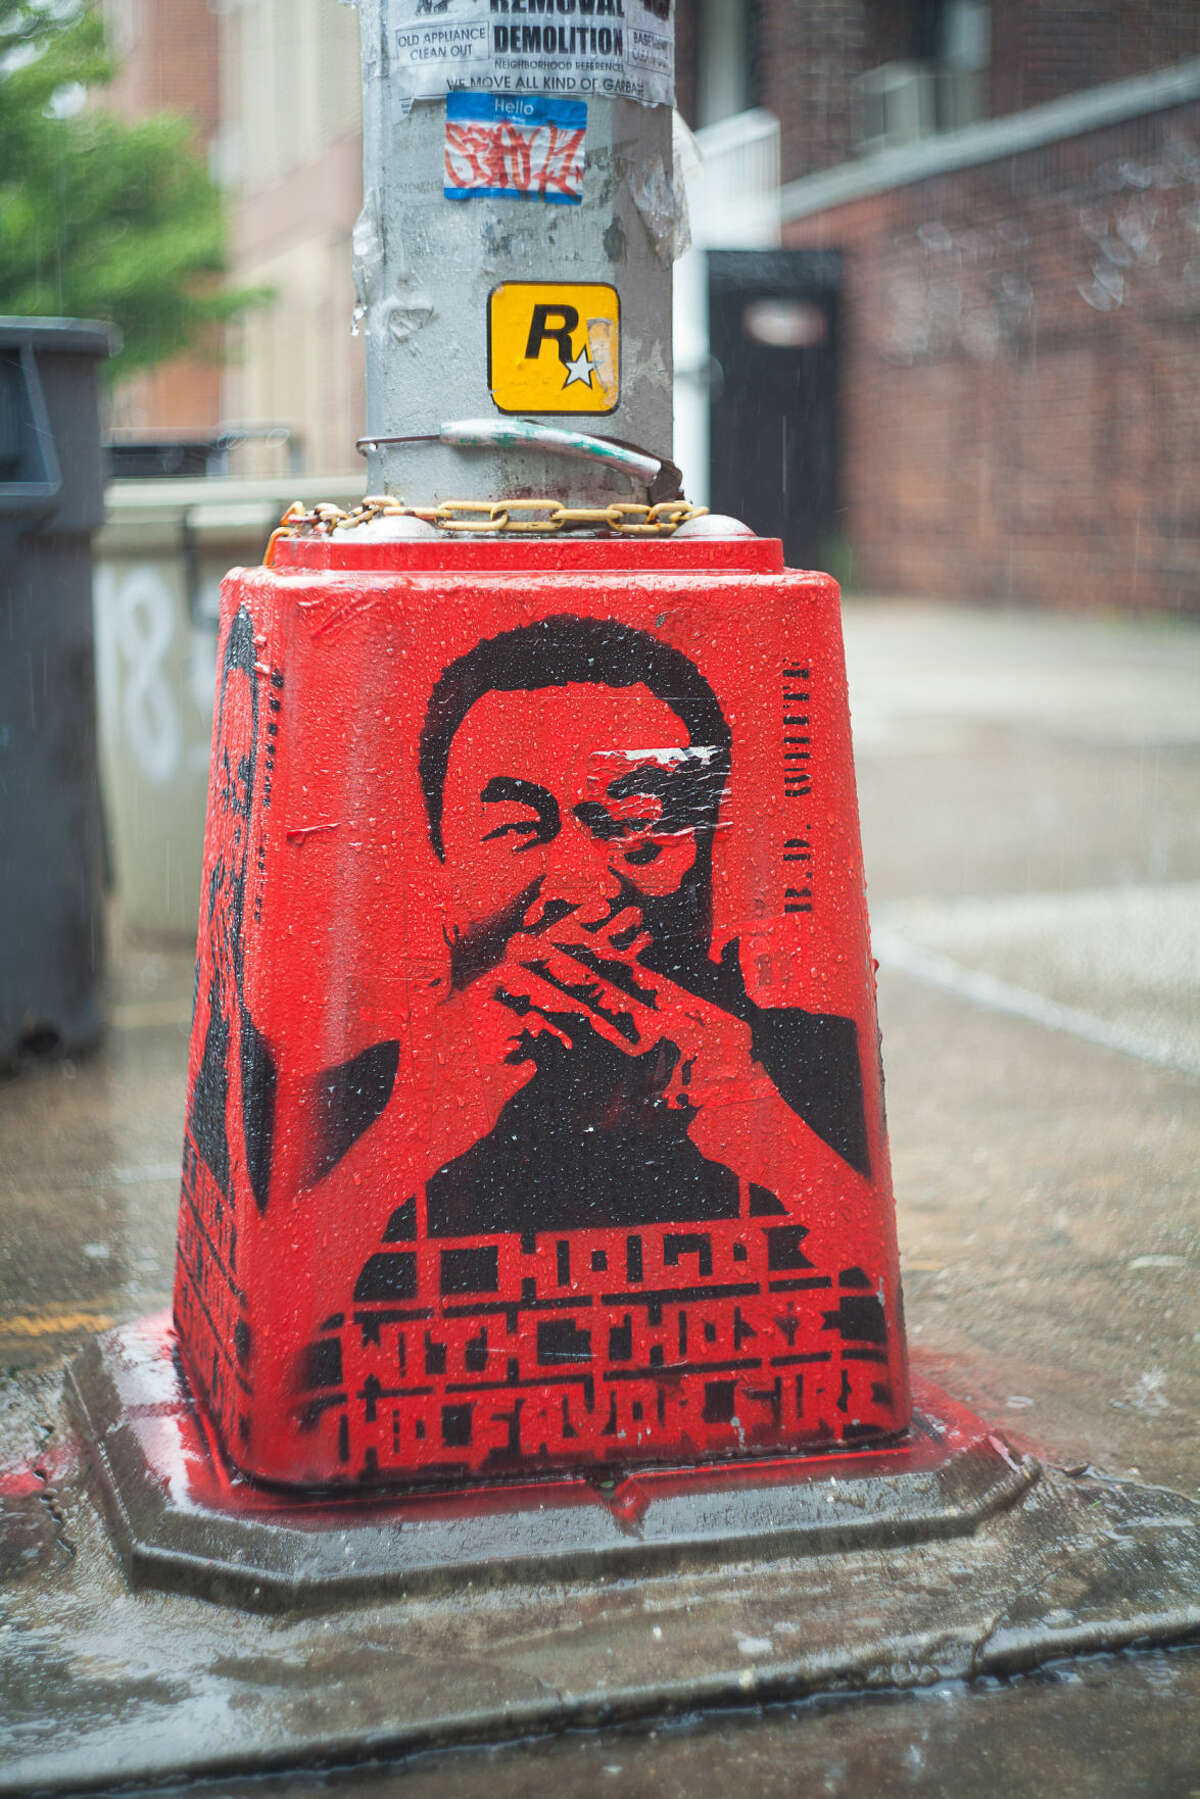 B.D. White’s colorful art work can often be found while walking the streets of New York. 